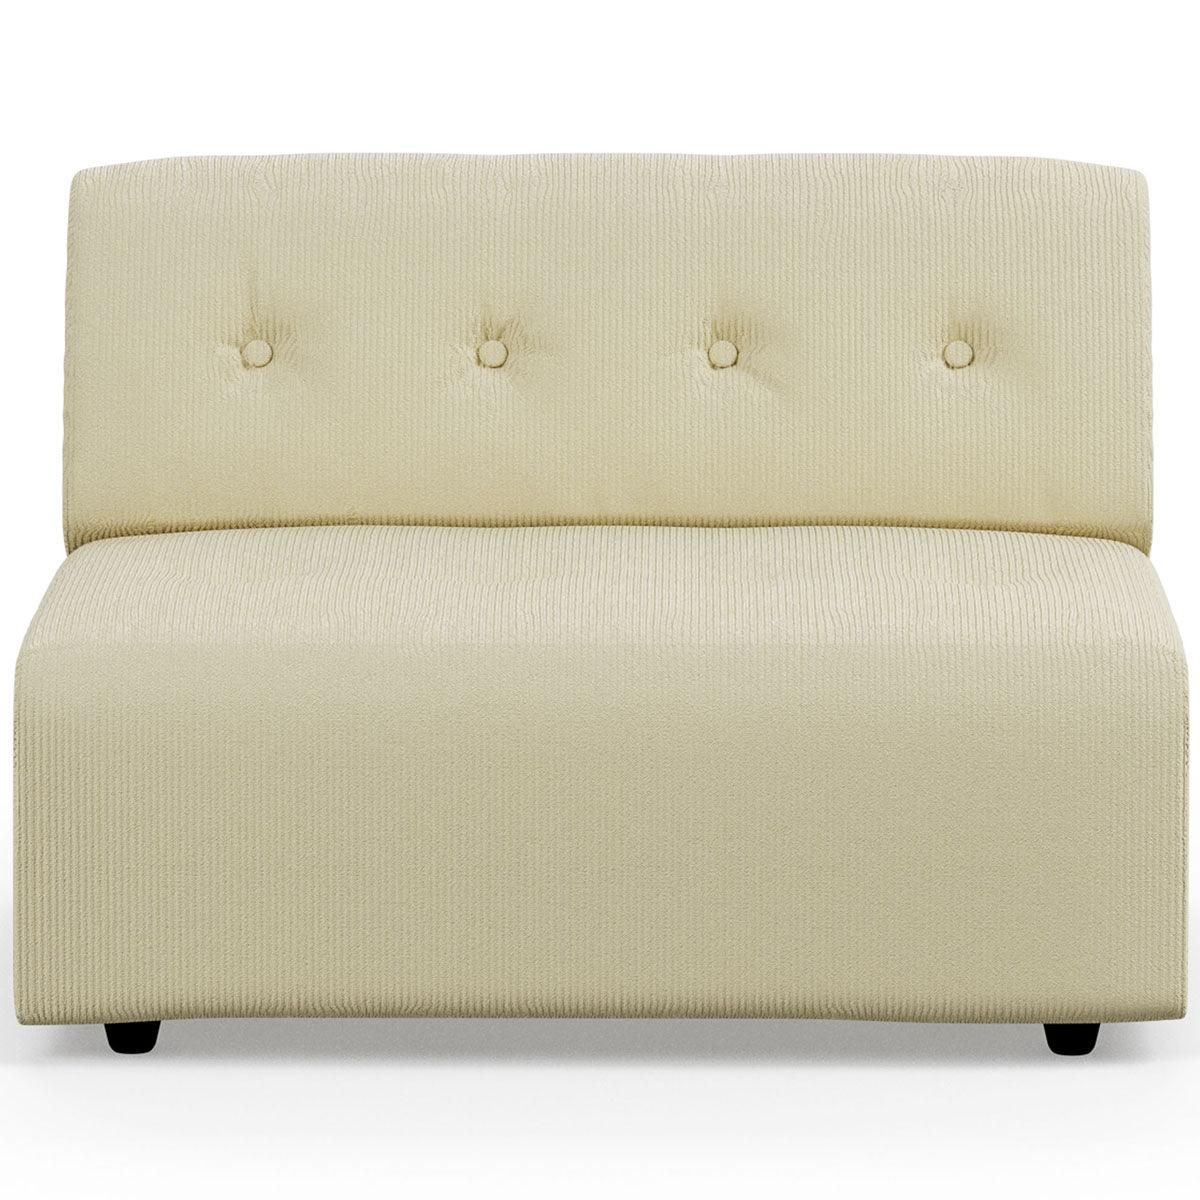 Vint Corduroy Rib Couch - Element Middle 1.5-Seat - WOO .Design